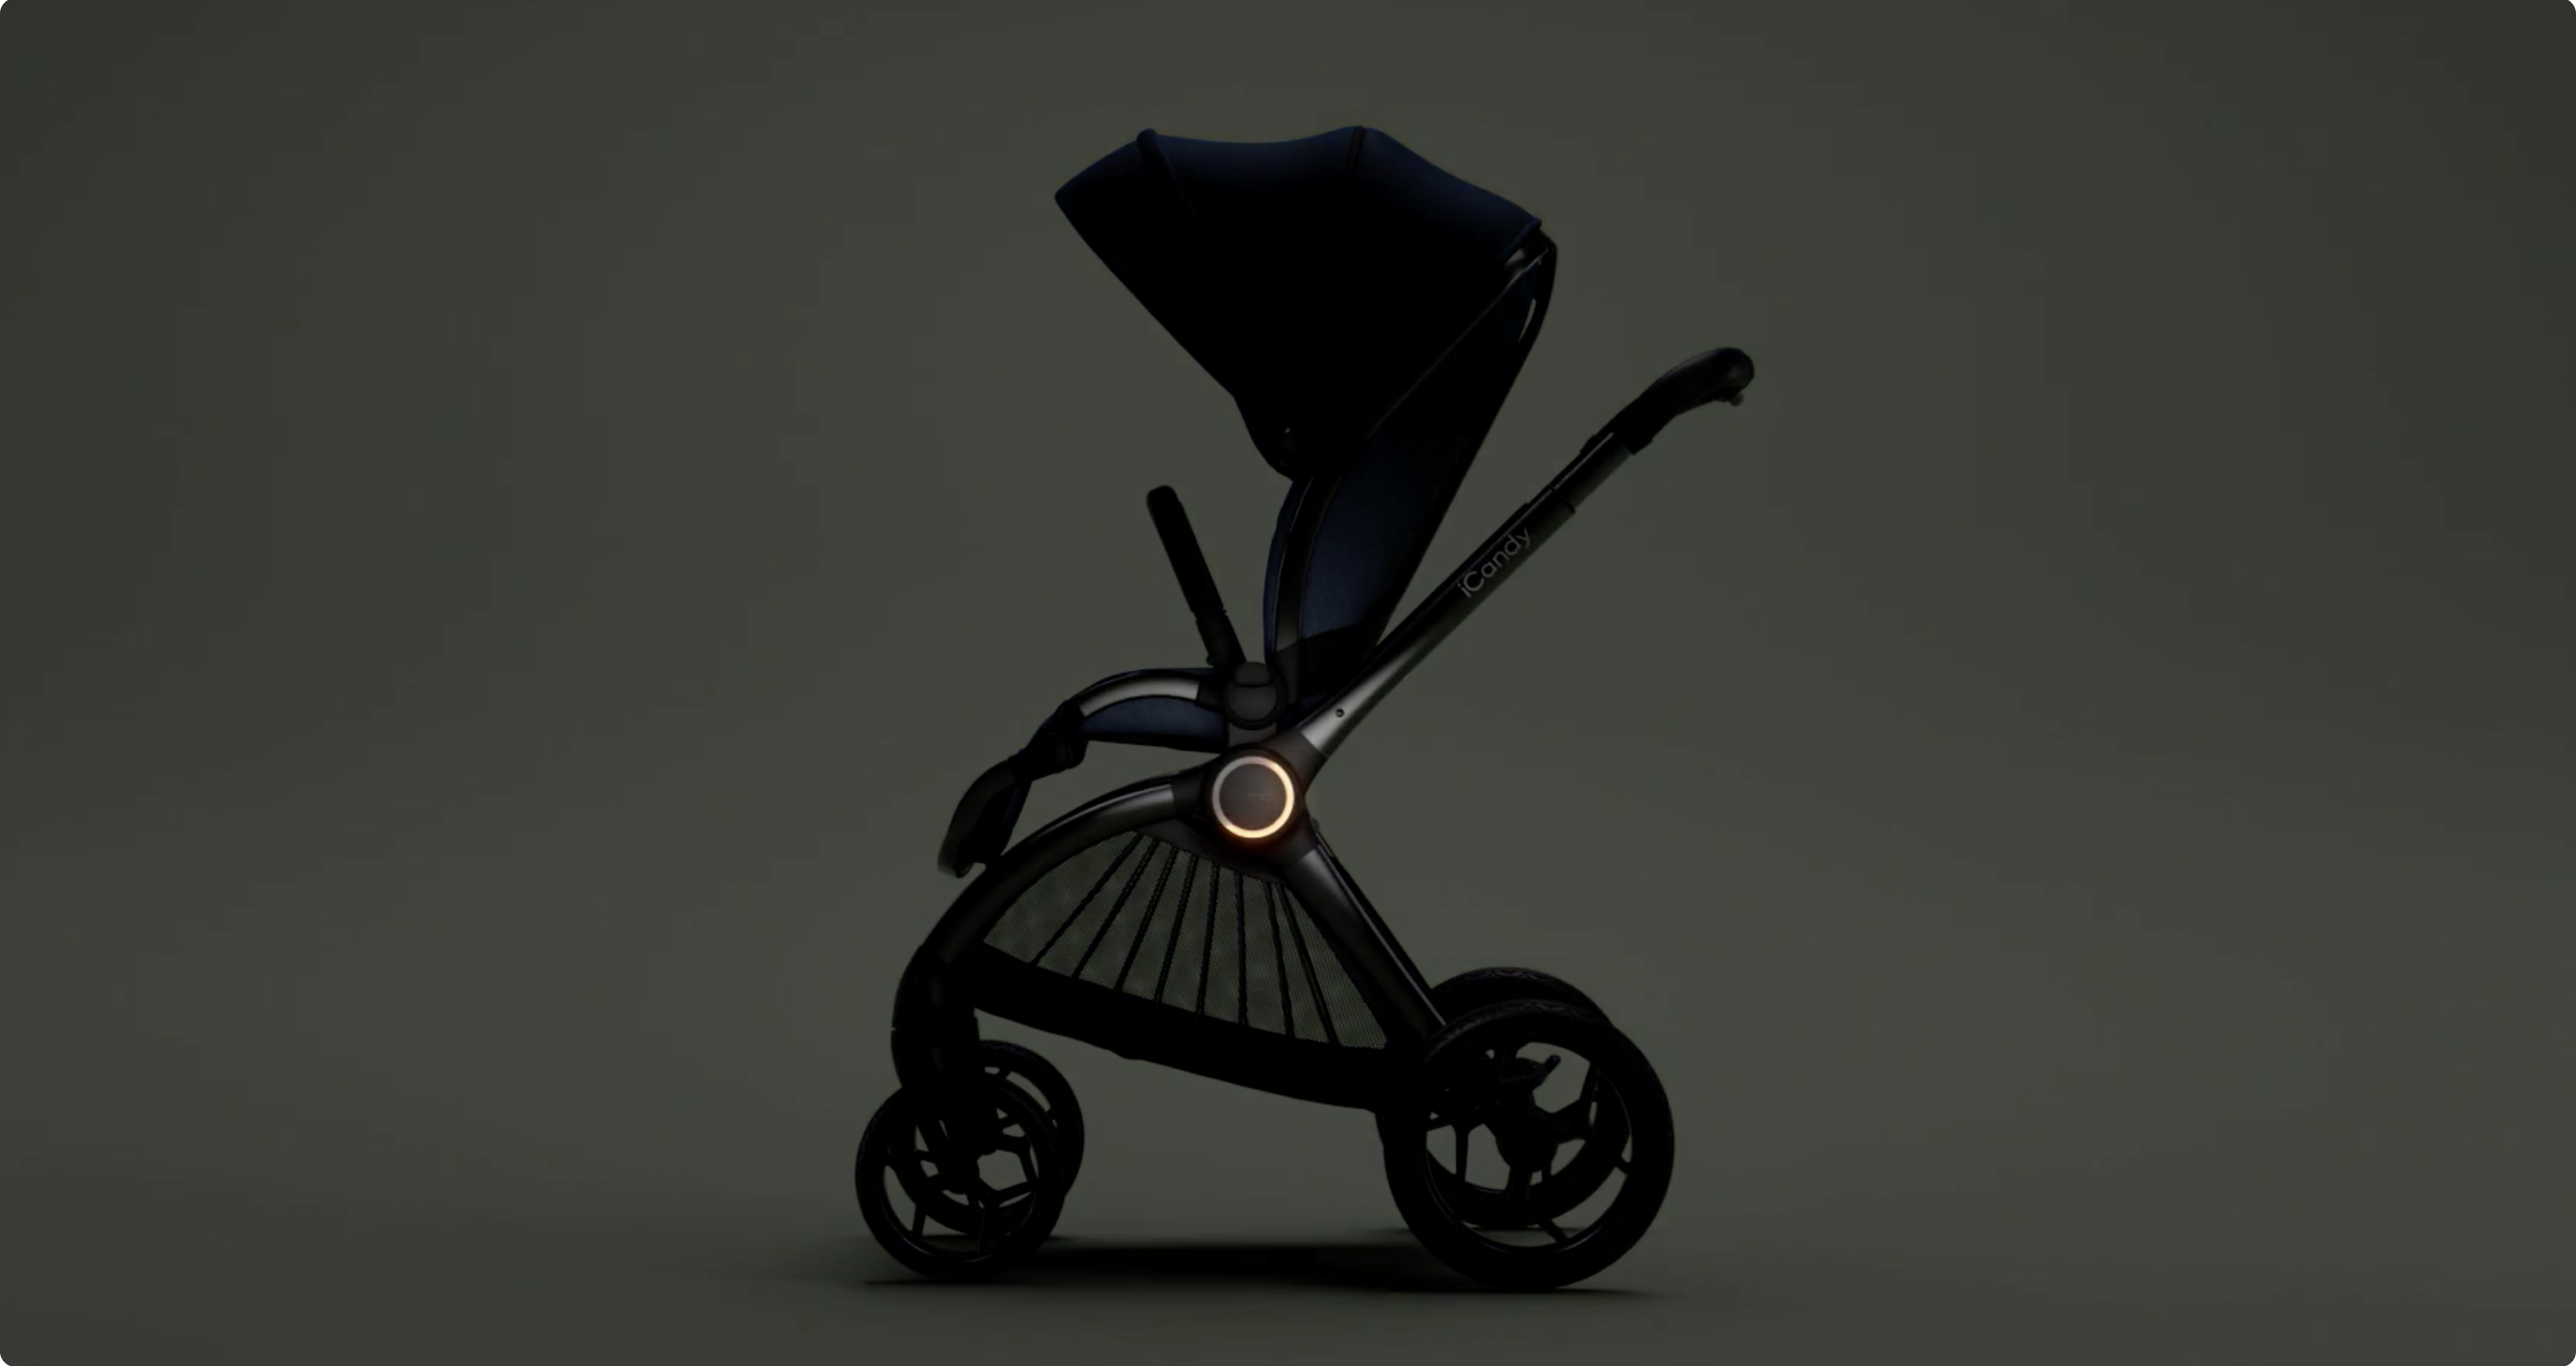 iCandy core pushchair campaign